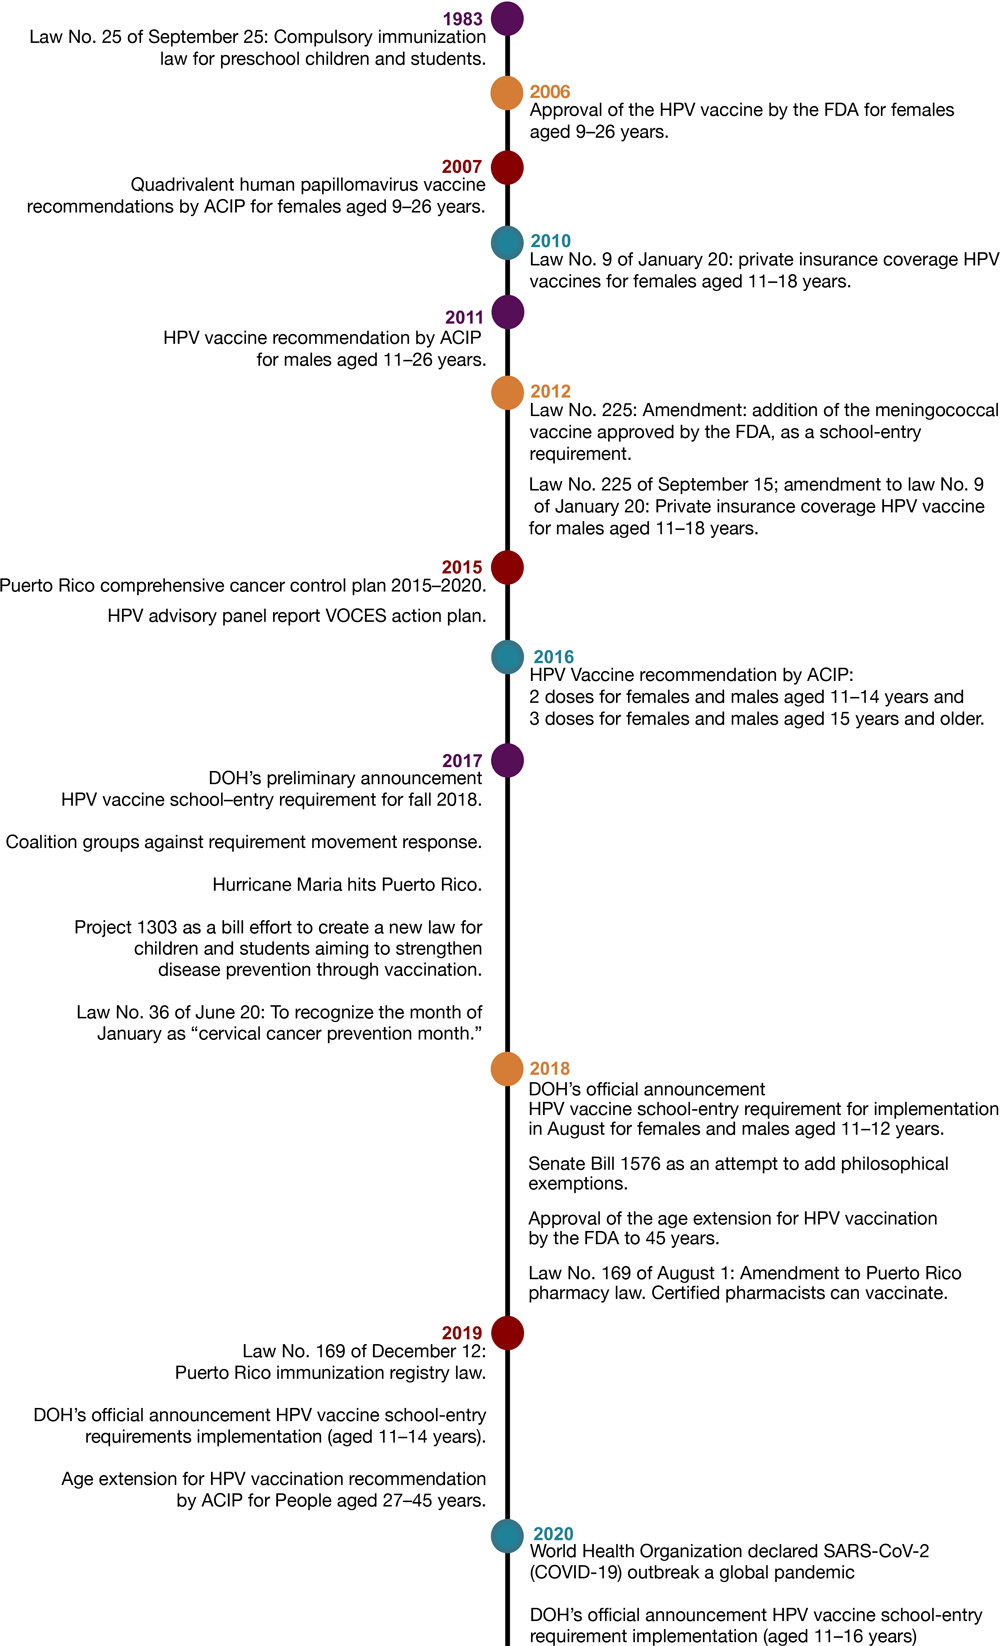 Timeline of events from adoption to implementation of the human papillomavirus (HPV) vaccine school-entry requirement in Puerto Rico, 1983–2020. Abbreviations: ACIP, Advisory Committee on Immunization Practices; DOH, Puerto Rico Department of Health; FDA, Federal Drug Administration; SARS-CoV-2, severe acute respiratory syndrome coronavirus 2; VOCES, Coalición de Vacunación de Puerto Rico.